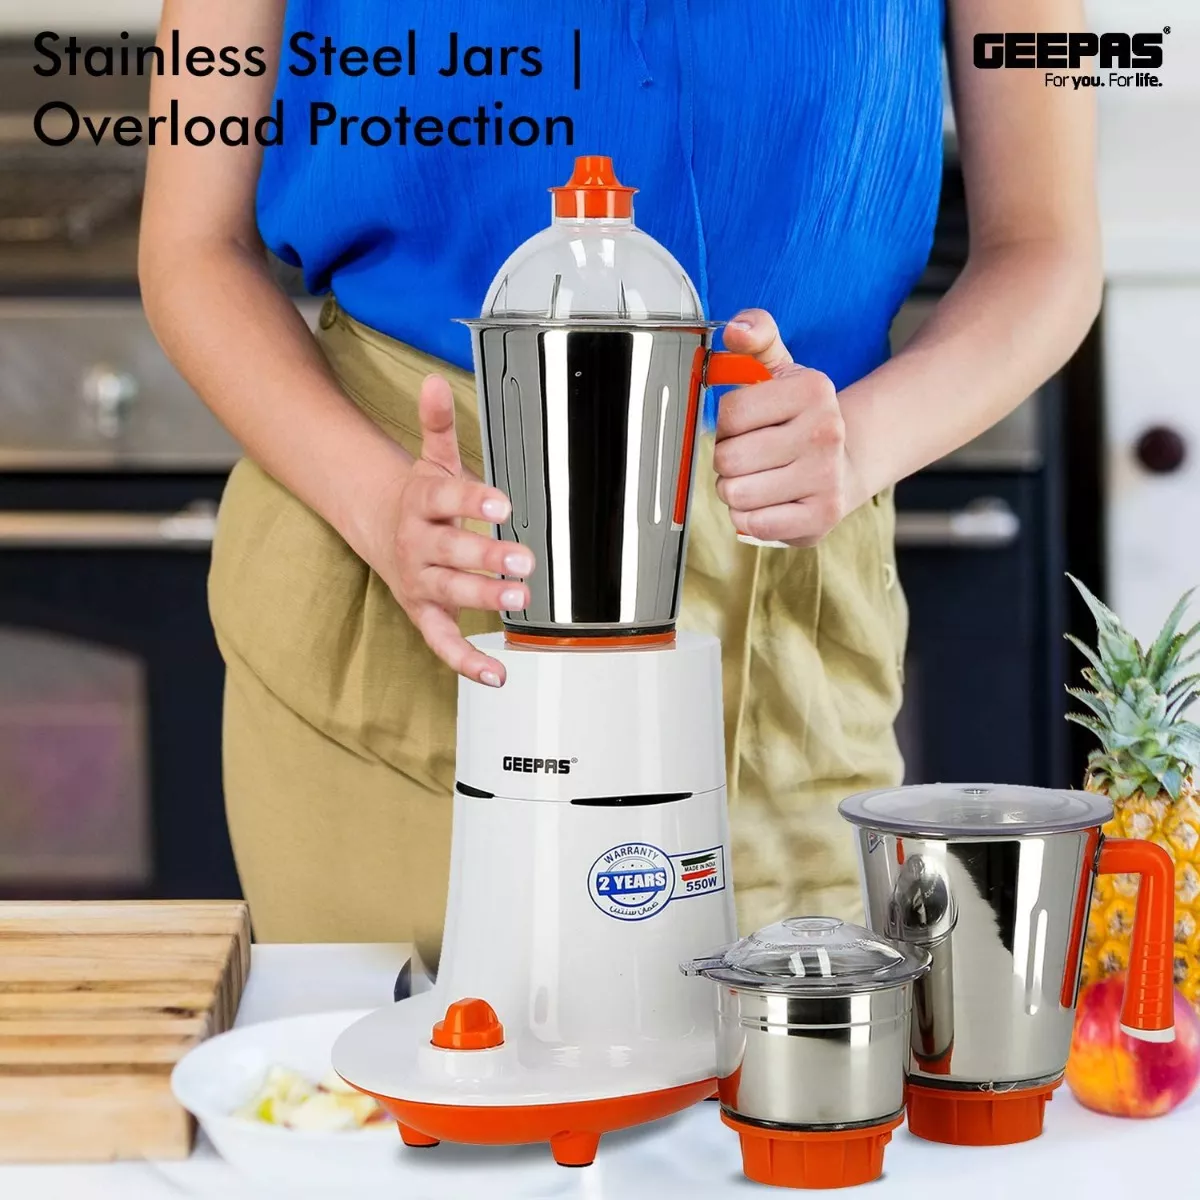 Geepas 750W 3-in-1 Mixer Grinder - Multifunctional Grinder with Stainless  Steel Jars & Blades - 3 Speed, Safety Twist Lock - Perfect for Dry & Wet  Fine Grinding Mixing Juicing - 2 Year Warranty